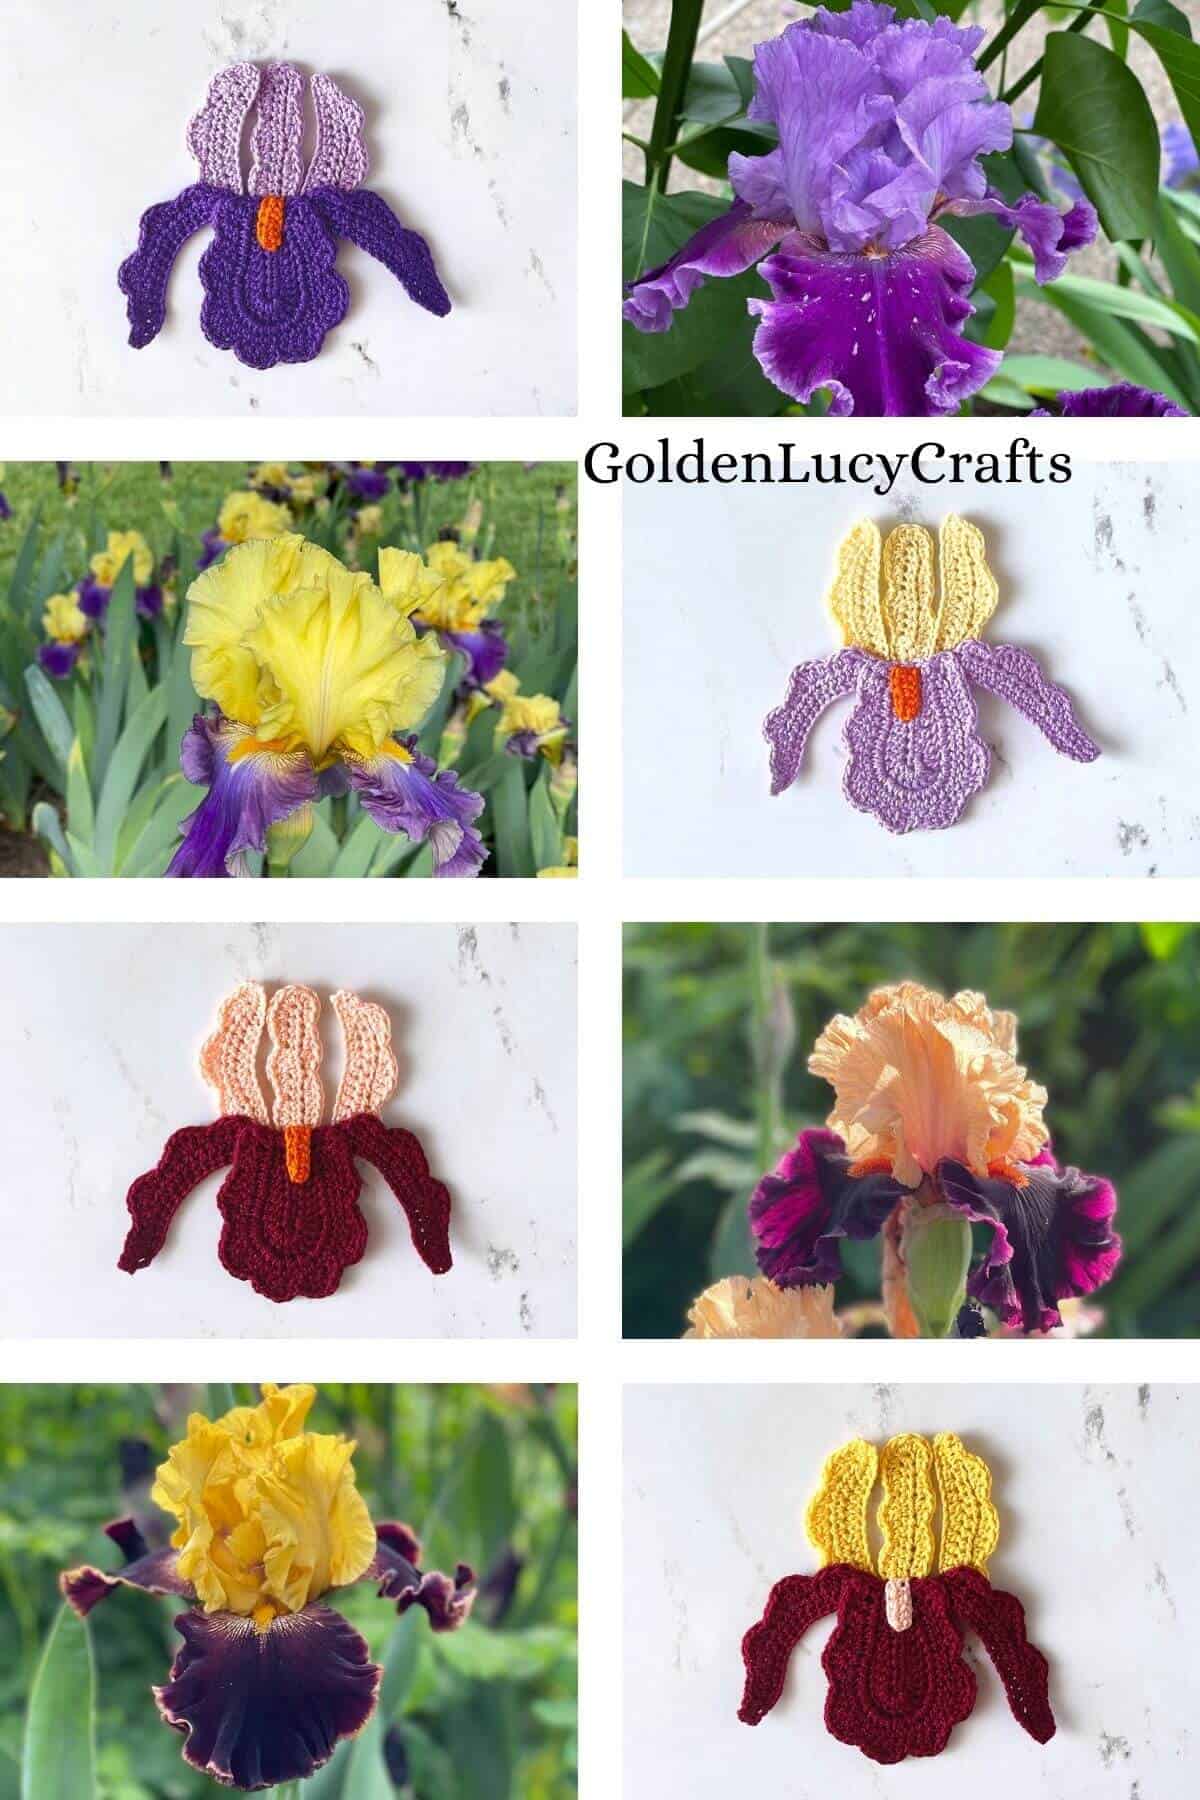 Picture collage of crocheted and real iris flowers.